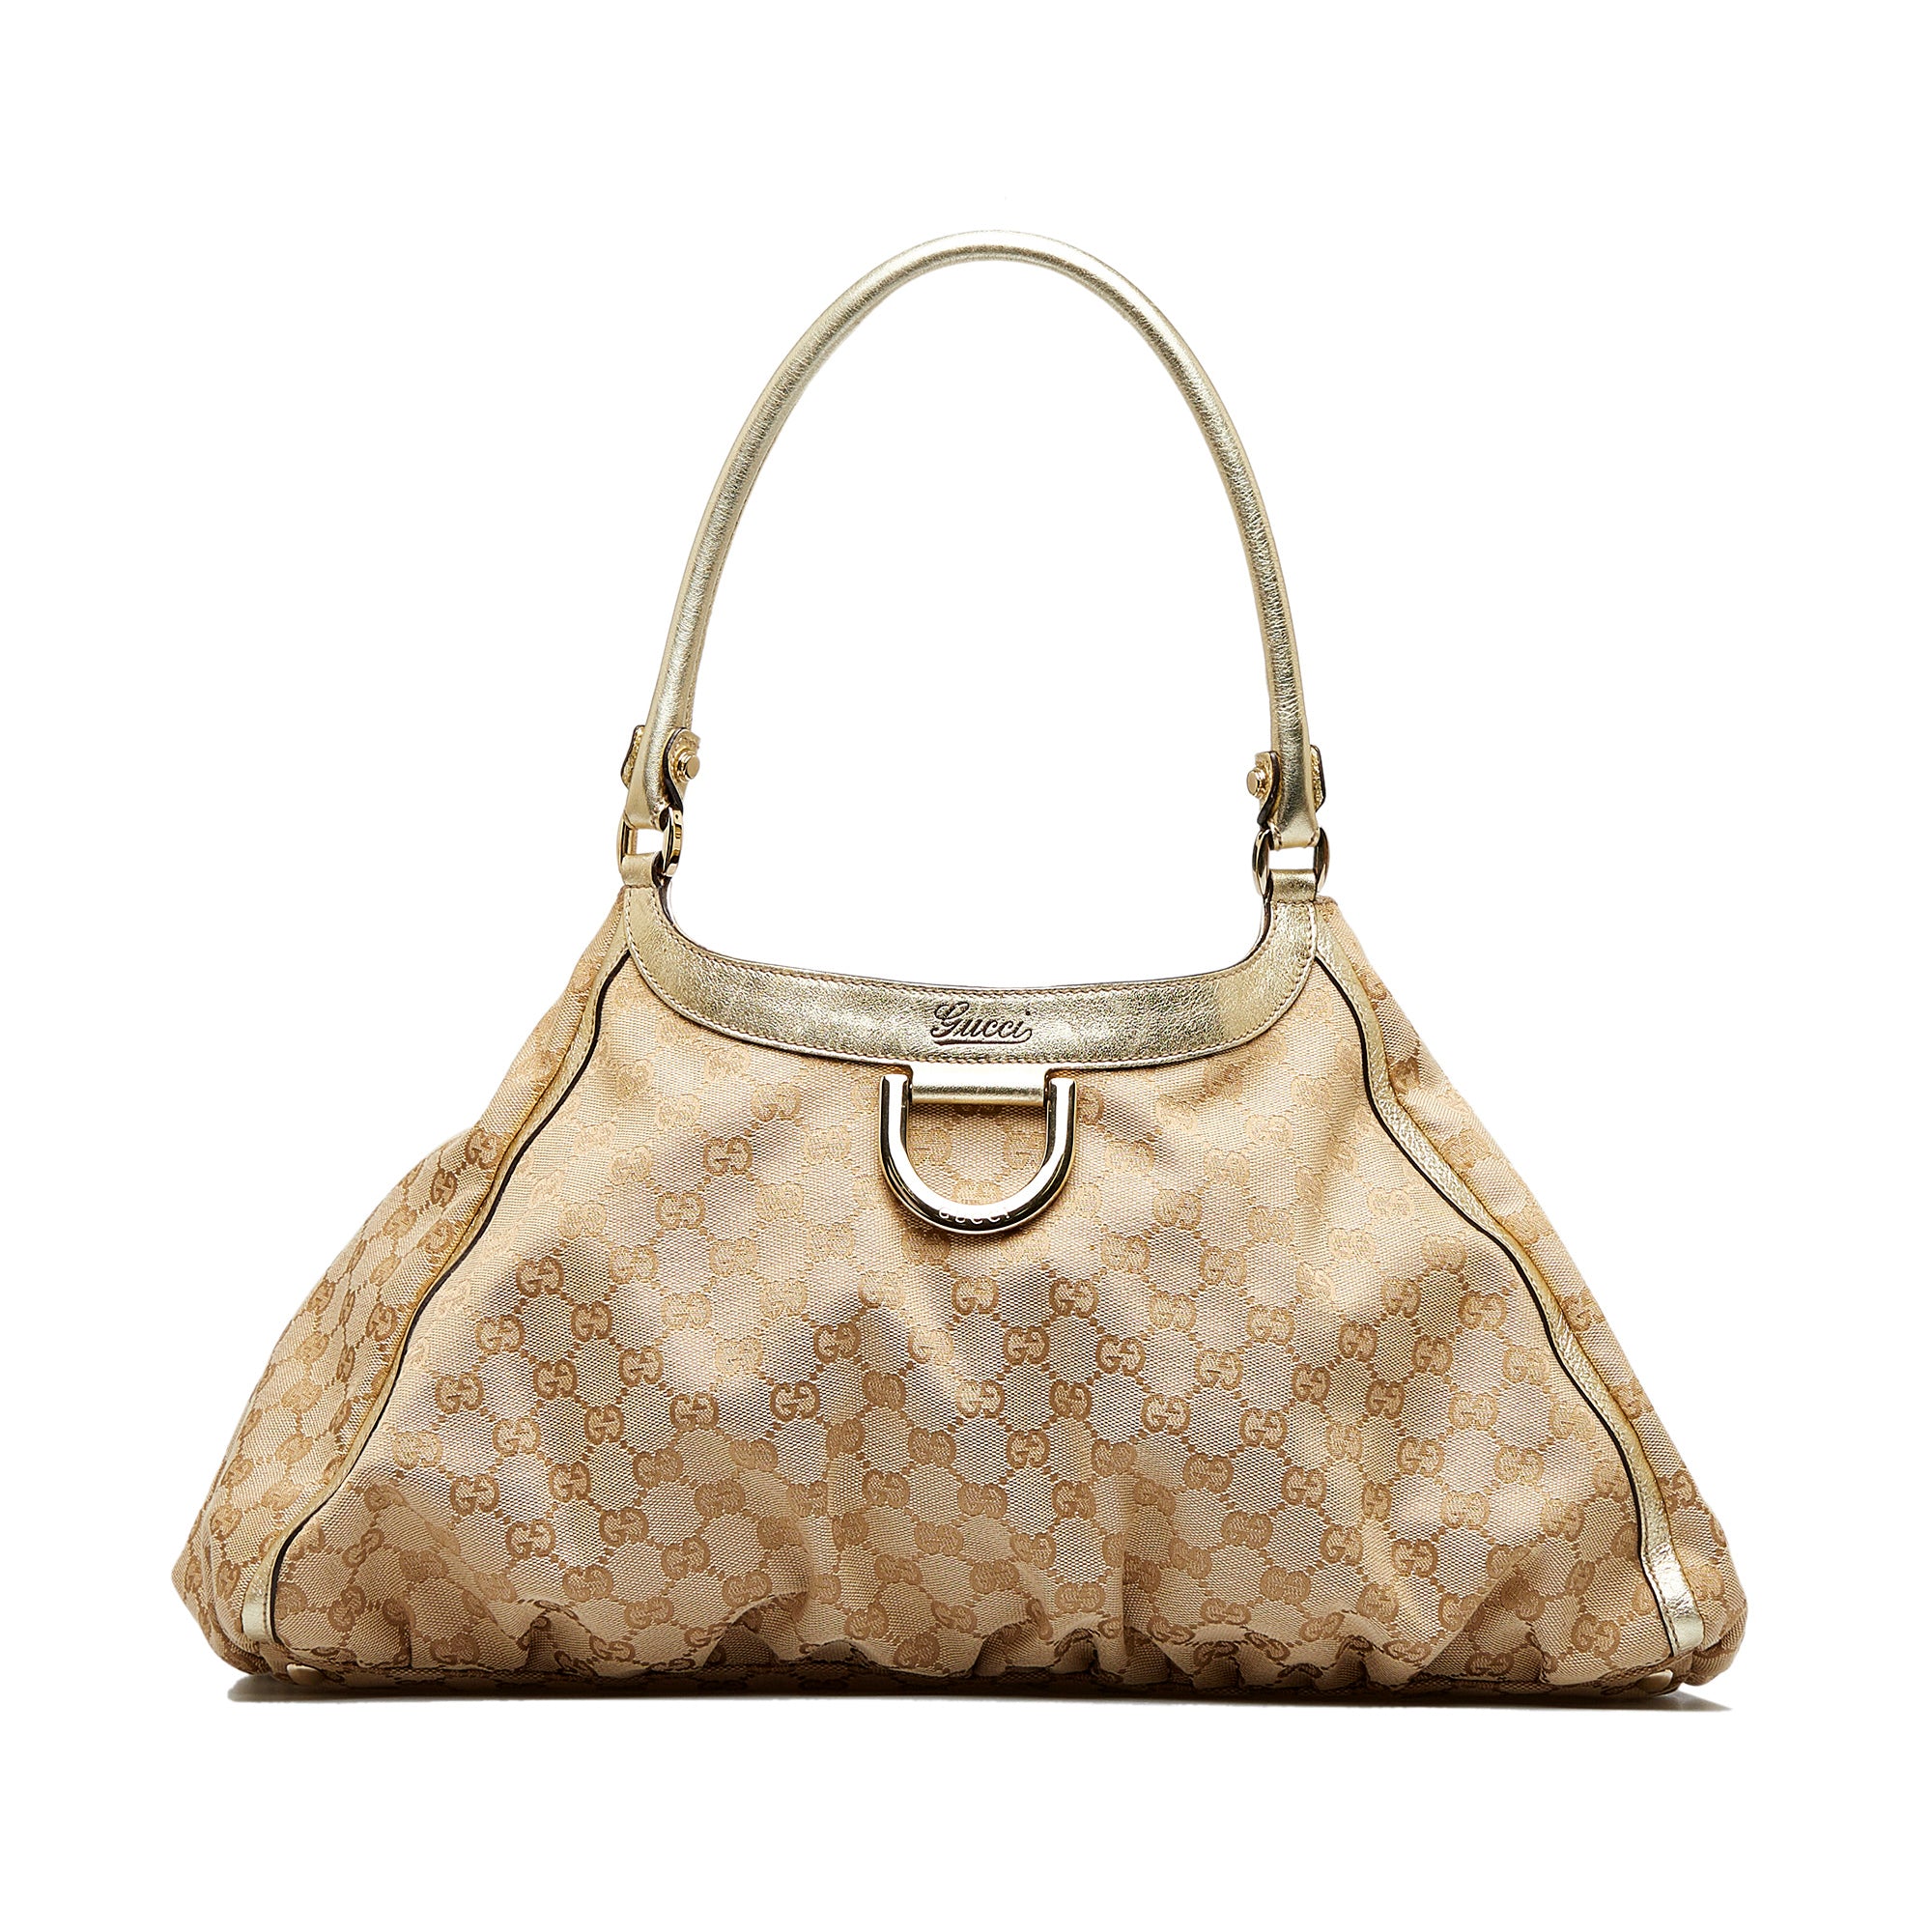 Gucci Authenticated D-Ring Handbag